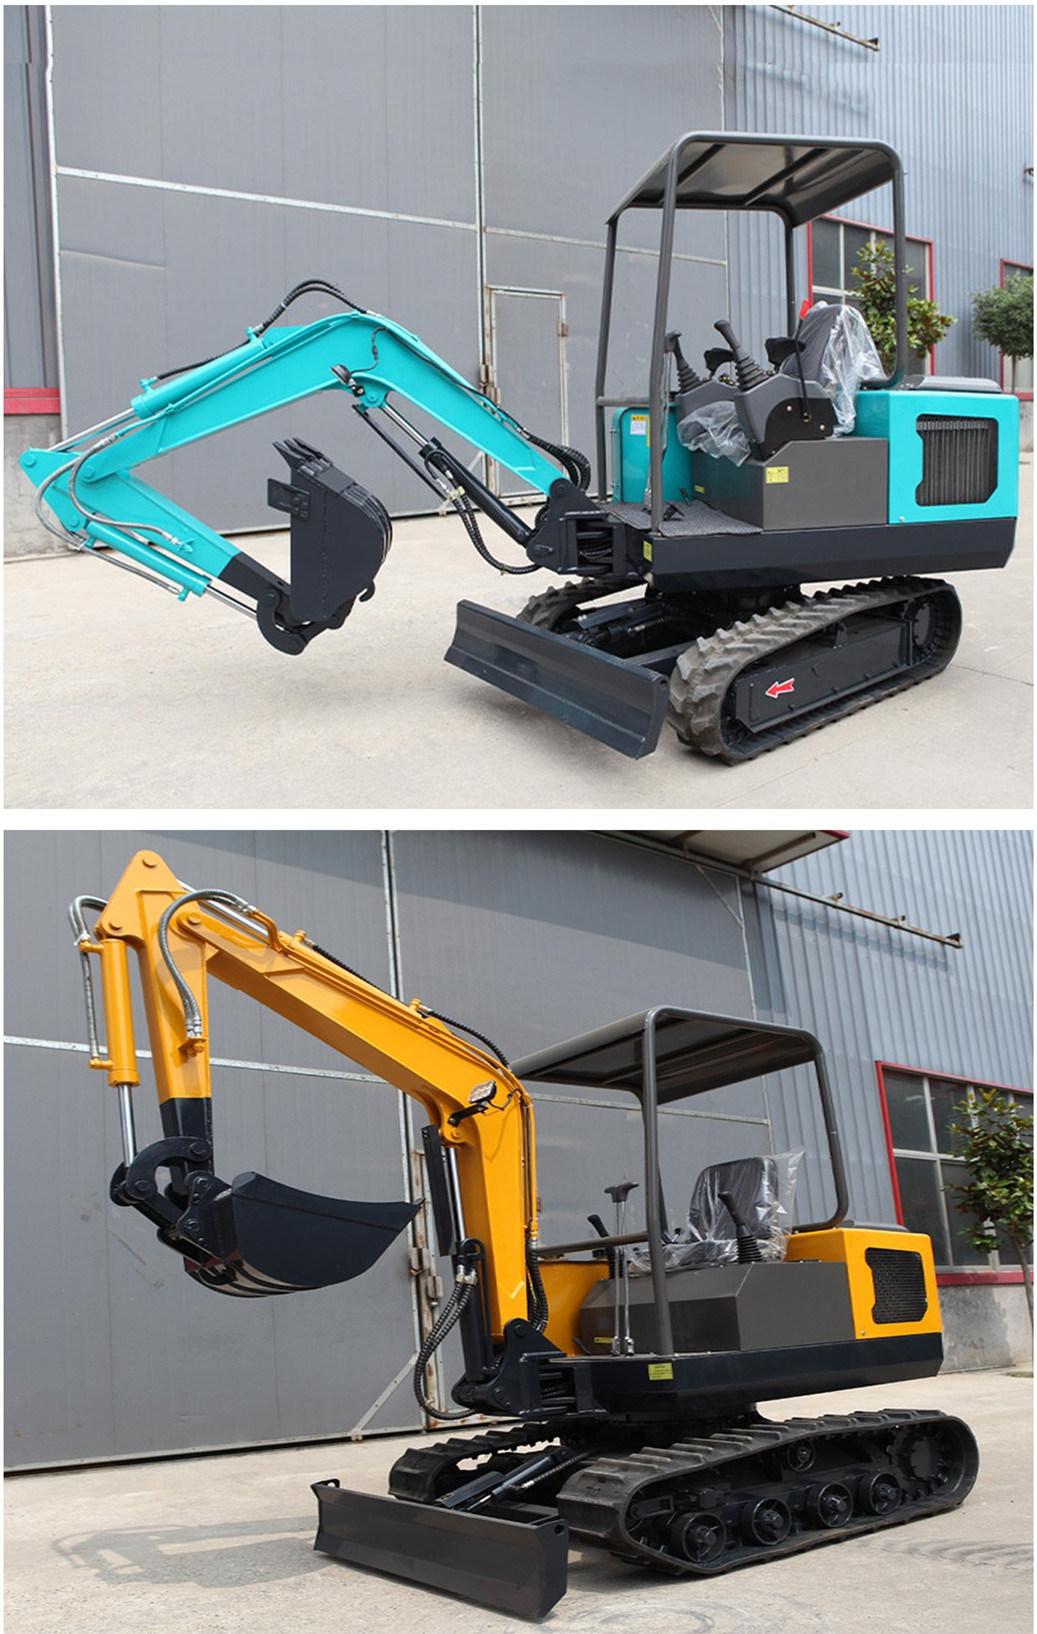 Small Durable Agriculture Machinery Equip Walking Speed Mini Excavator